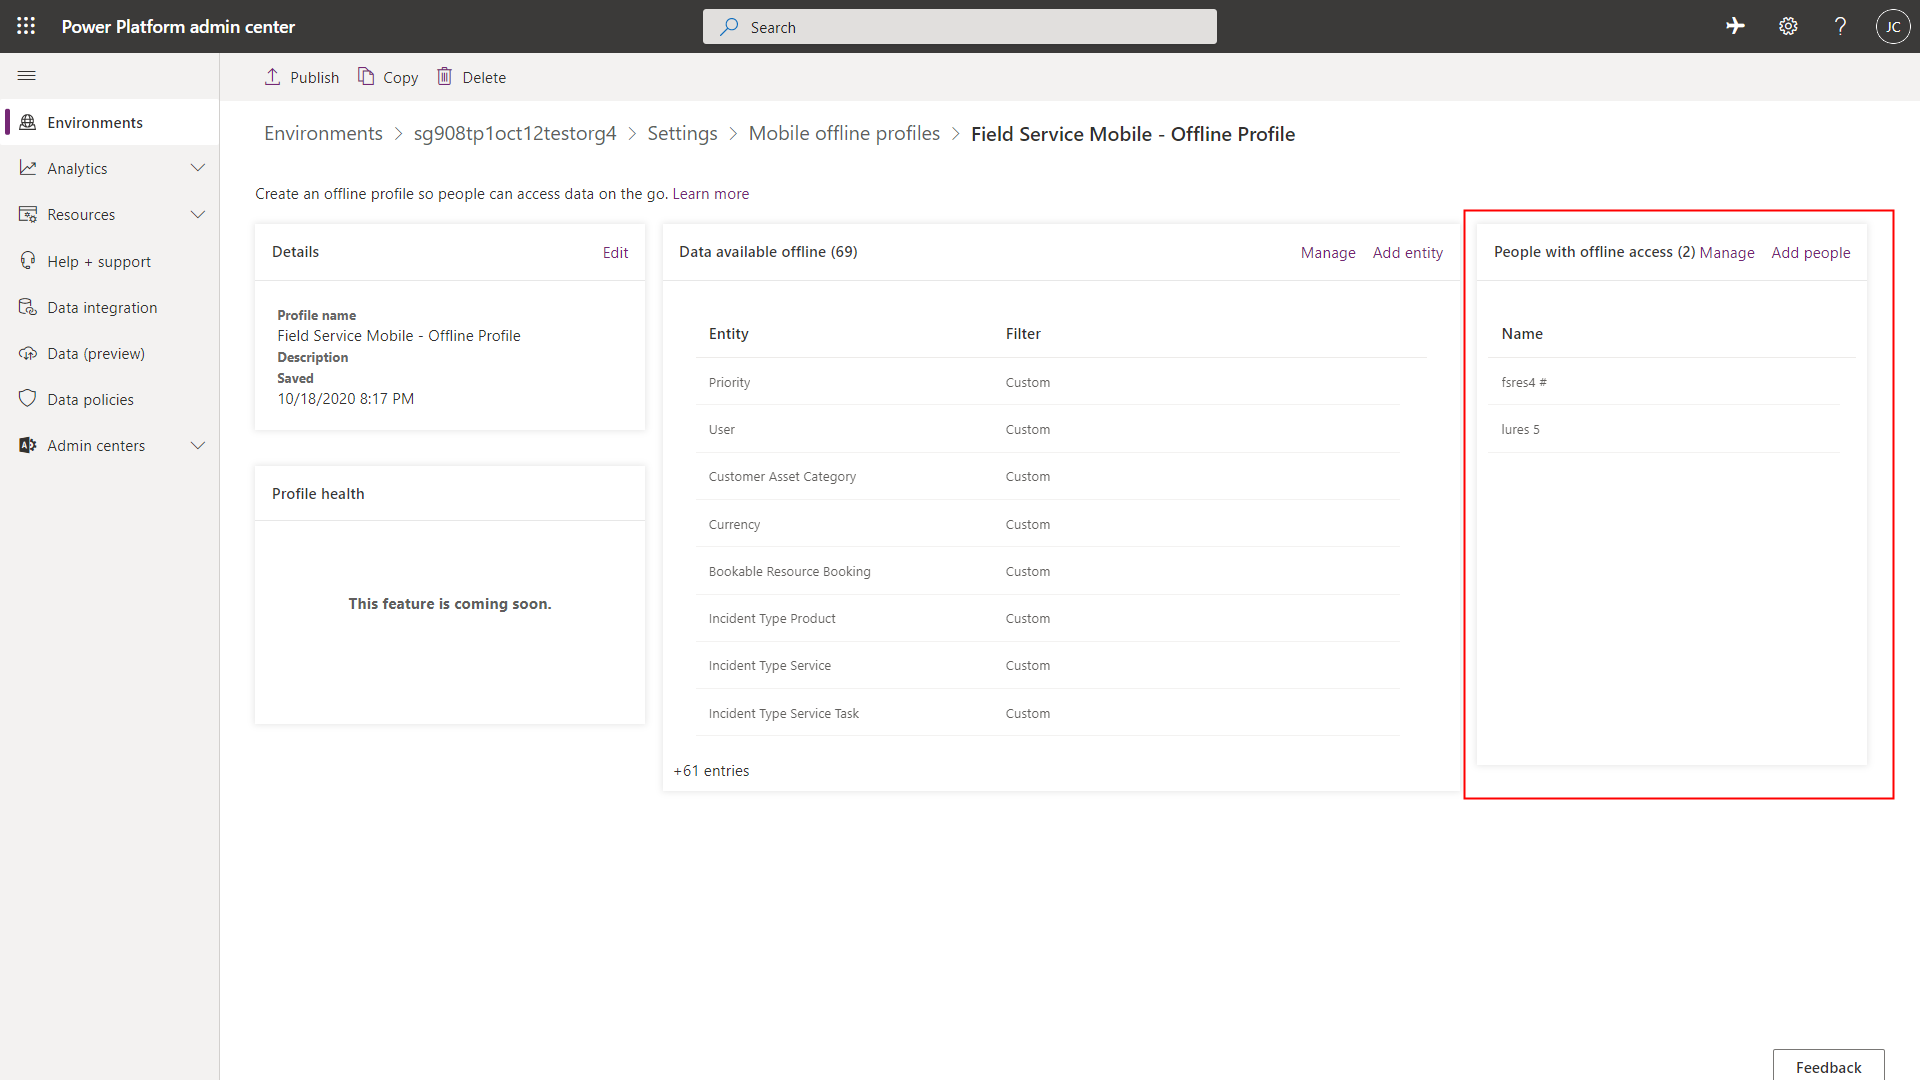 Screenshot of the Power Platform admin center, showing the section where to add users to the offline profile.